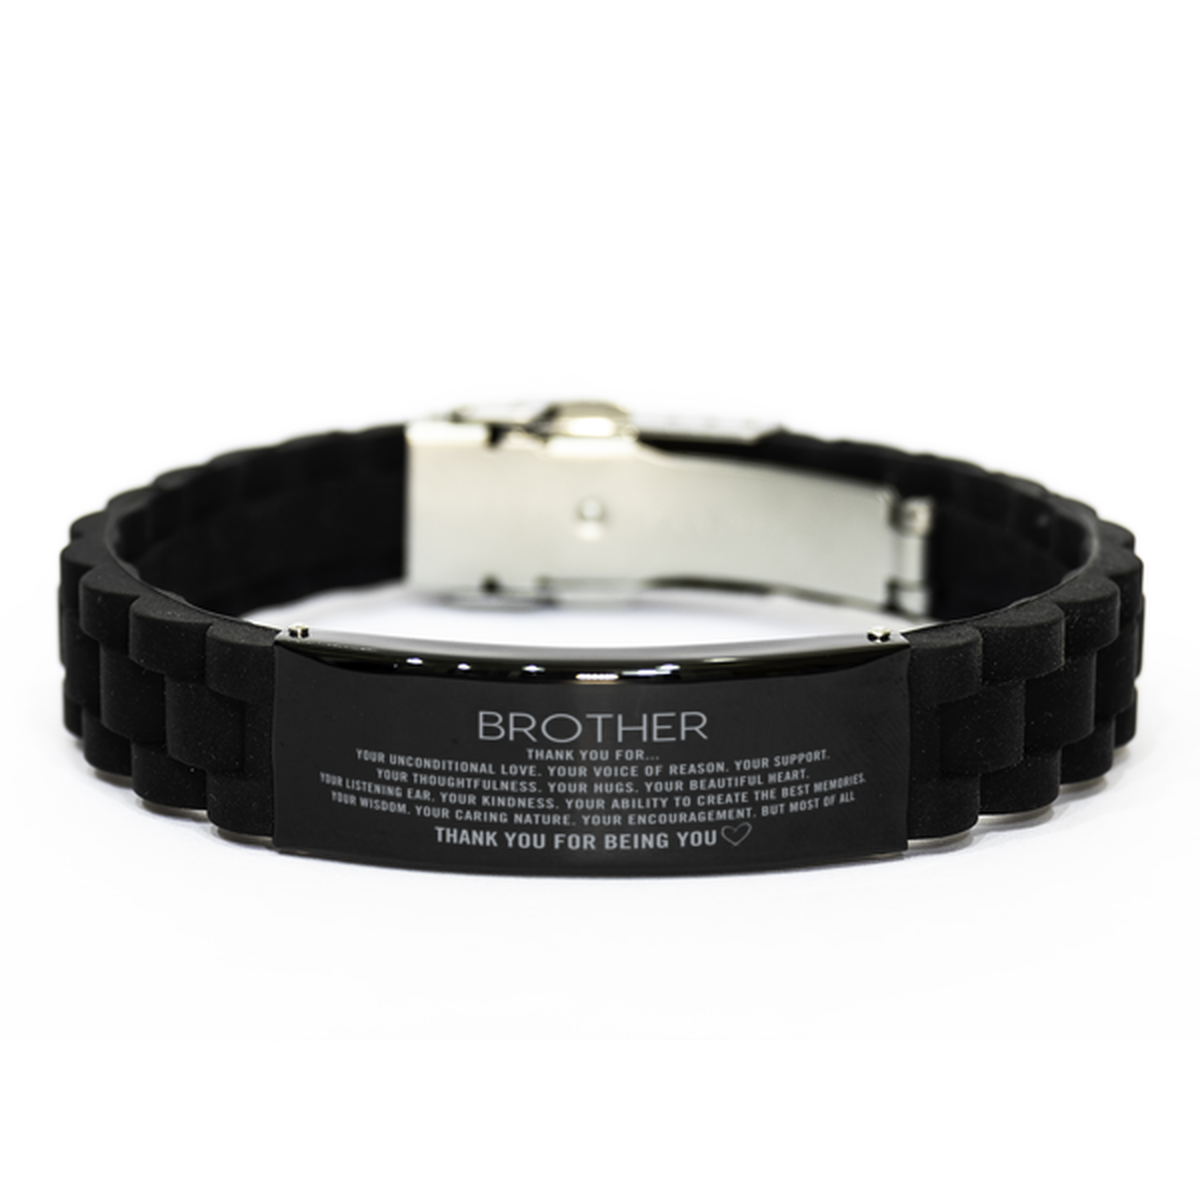 Brother Black Glidelock Clasp Bracelet Custom, Engraved Gifts For Brother Christmas Graduation Birthday Gifts for Men Women Brother Thank you for Your unconditional love